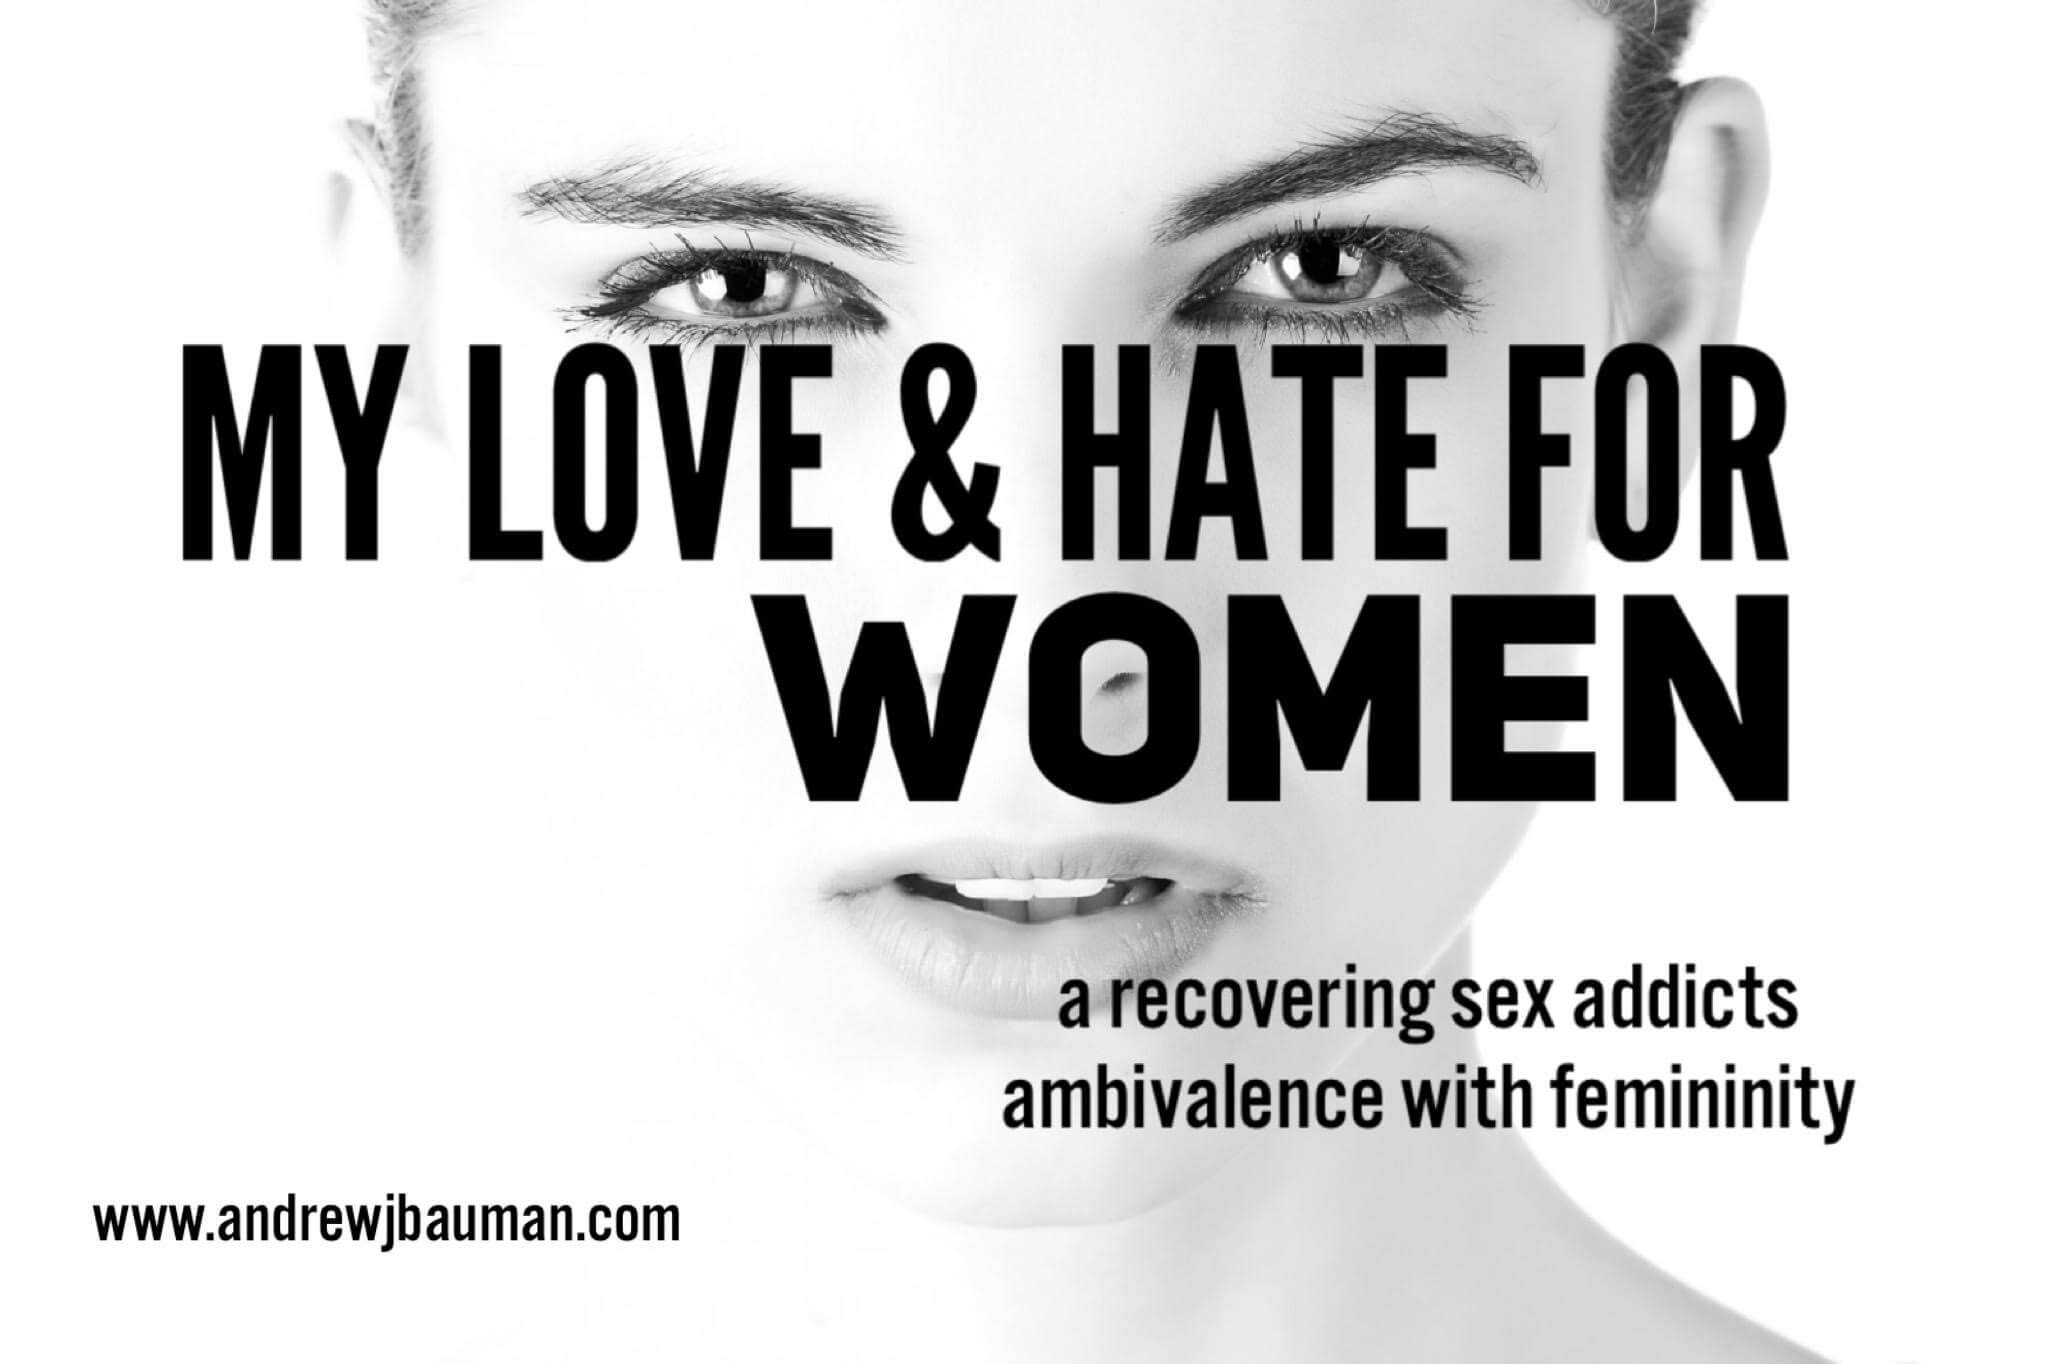 My Love and Hate for Women a recovering sex addicts ambivalence with femininity